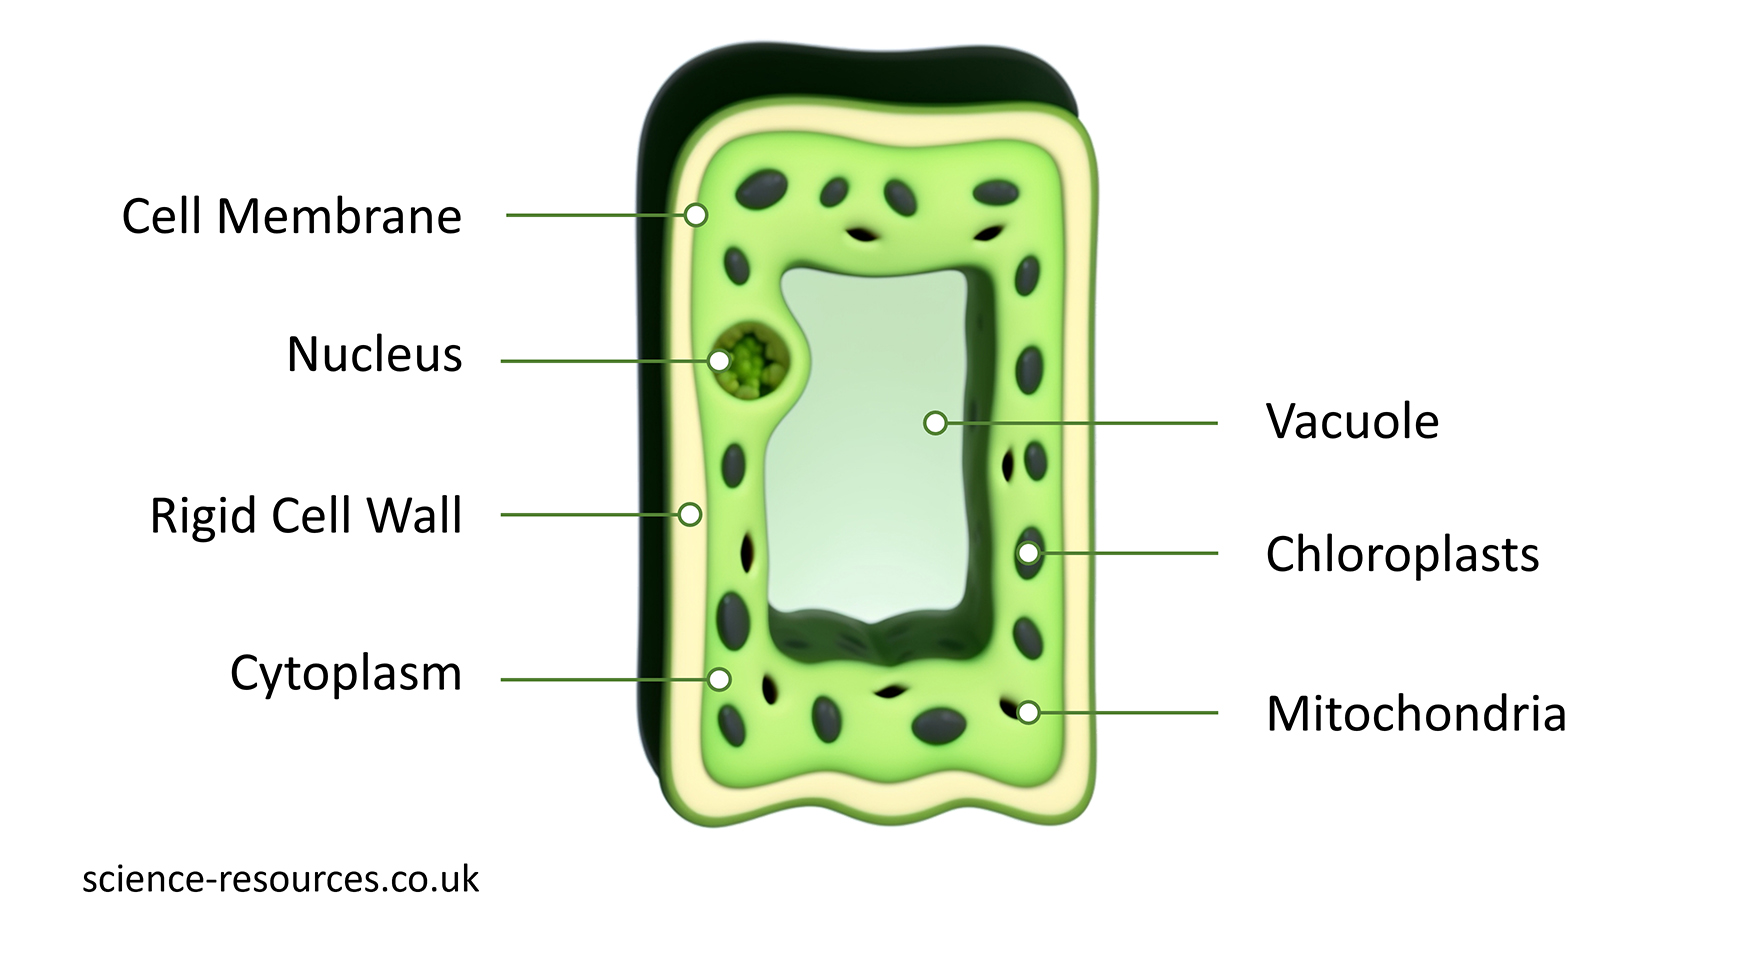 mage of an animal cell showing its 7 main parts: nucleus, cytoplasm, cell membrane, cell wall, vacuole, chloroplasts and mitochondria.